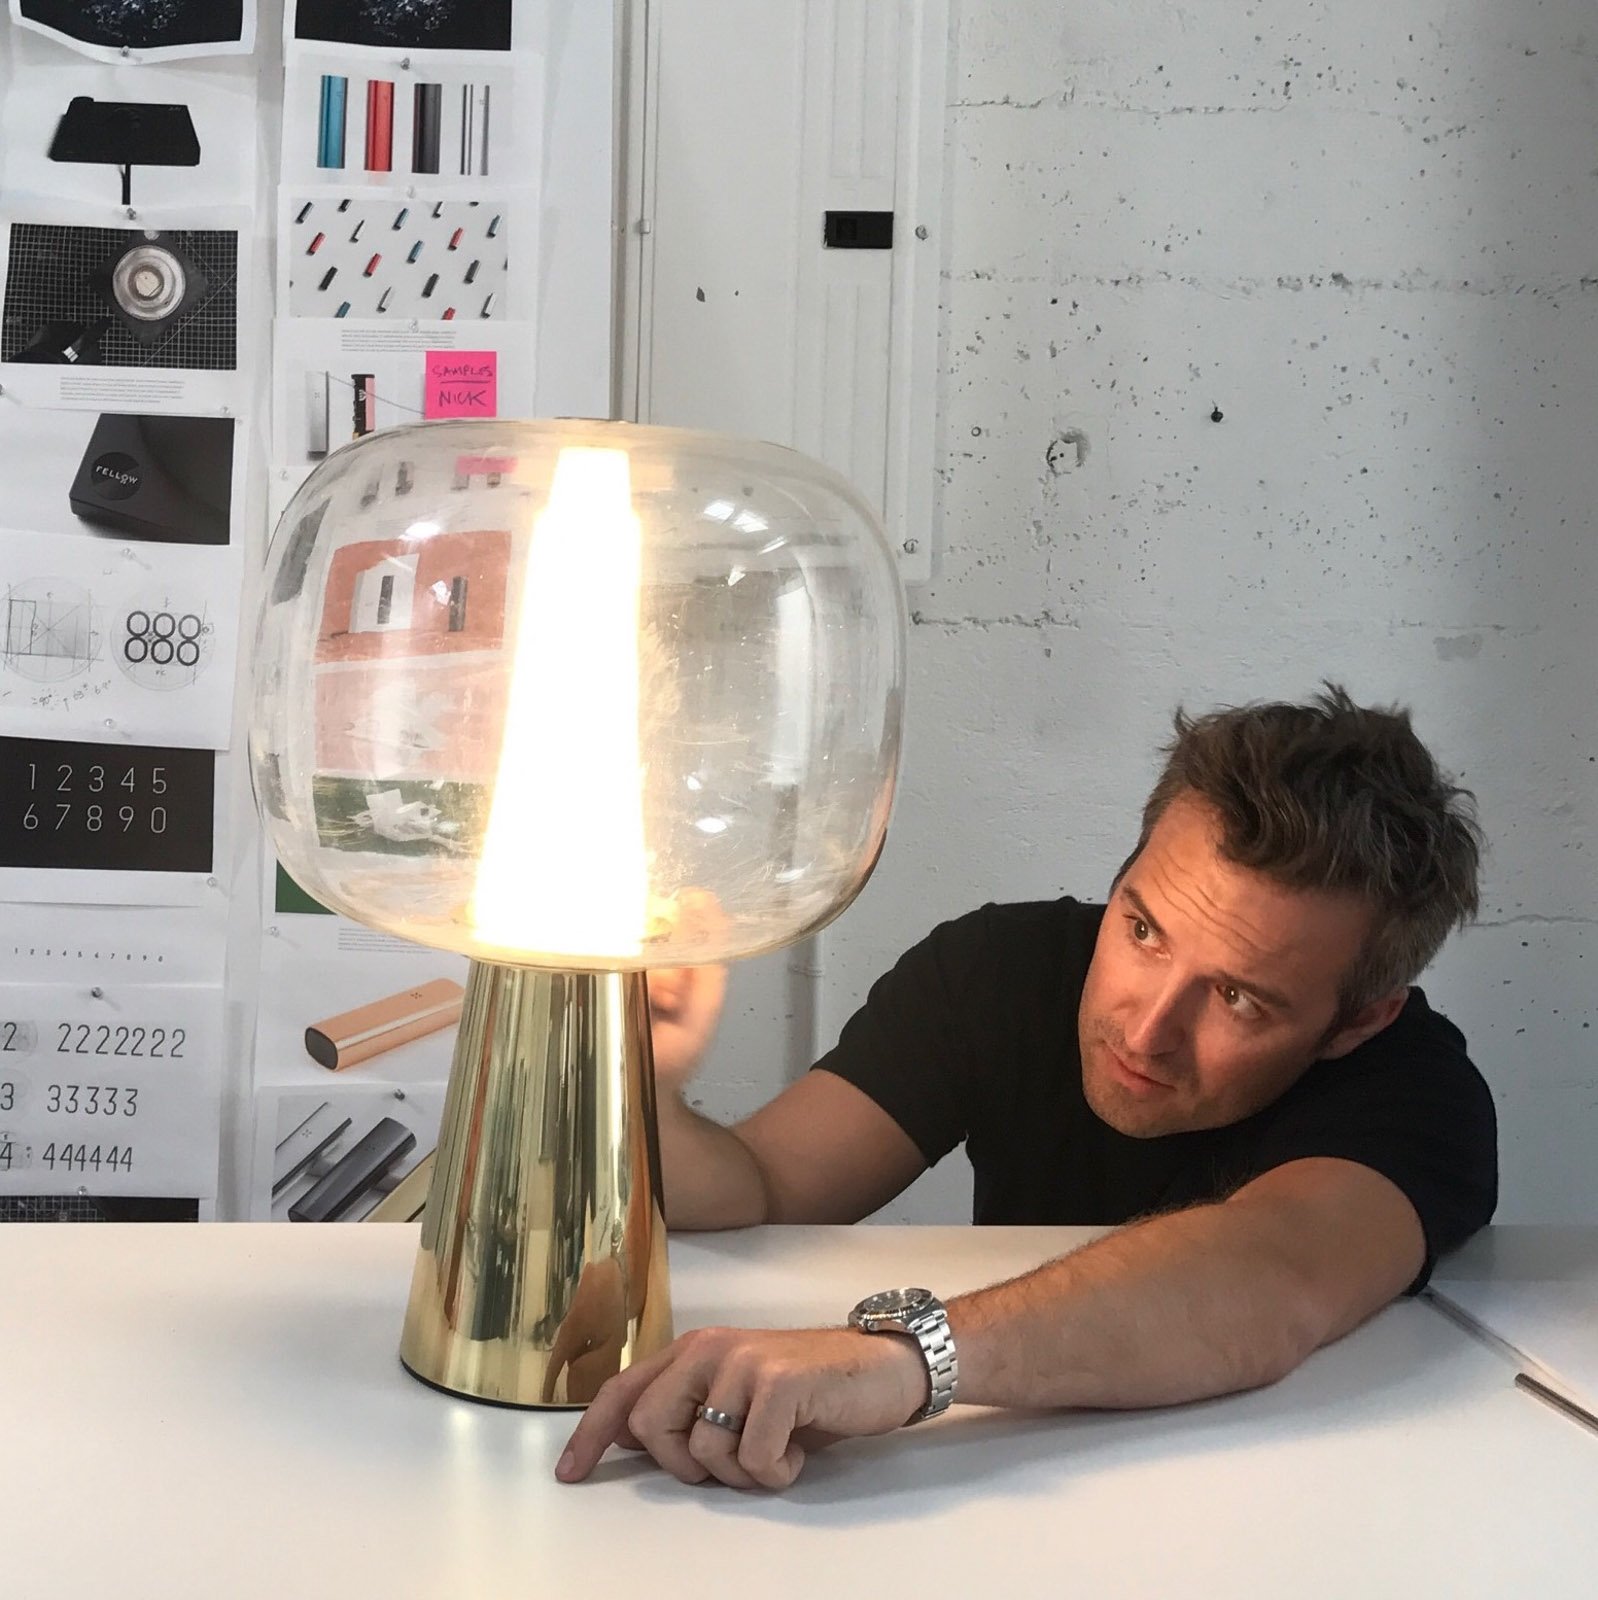 A man in a black t-shirt closely inspects a modernist illuminated lamp made of metal and glass.